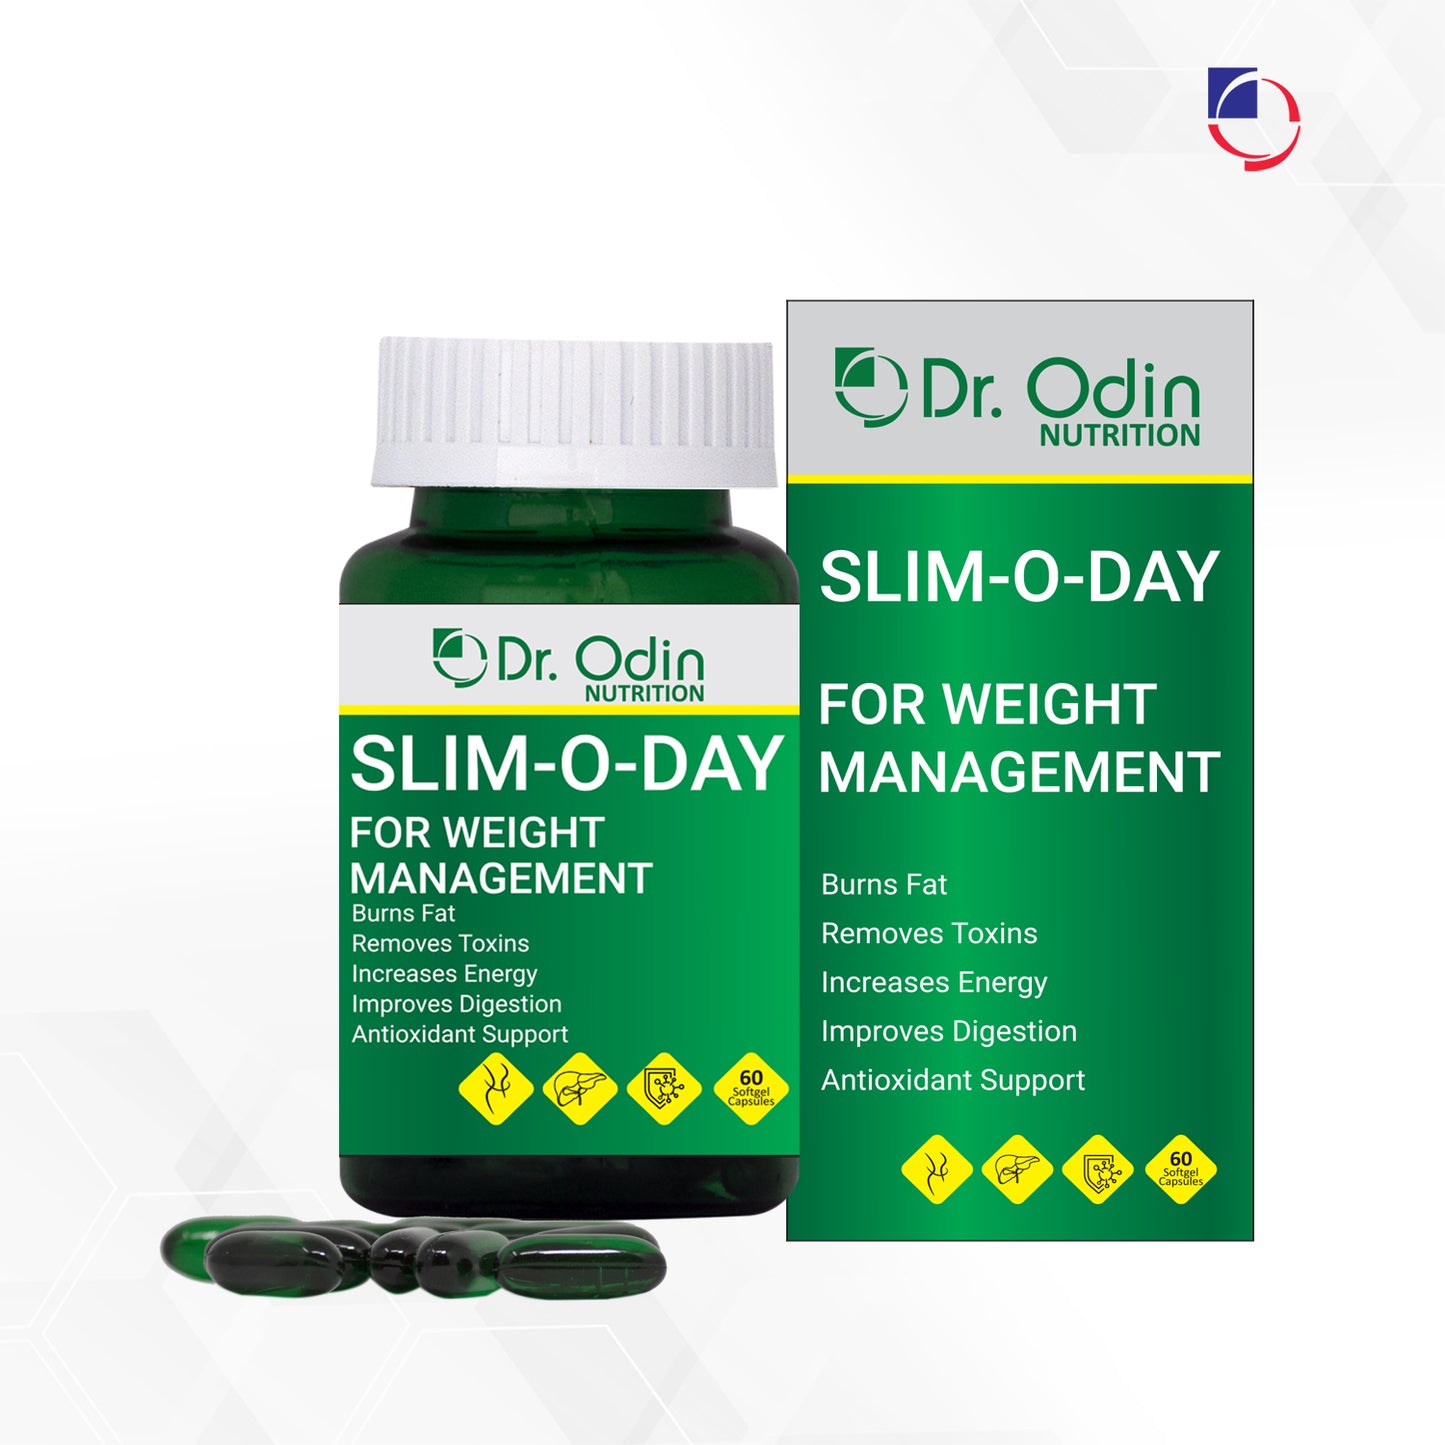 Supplements - Slim-O-Day